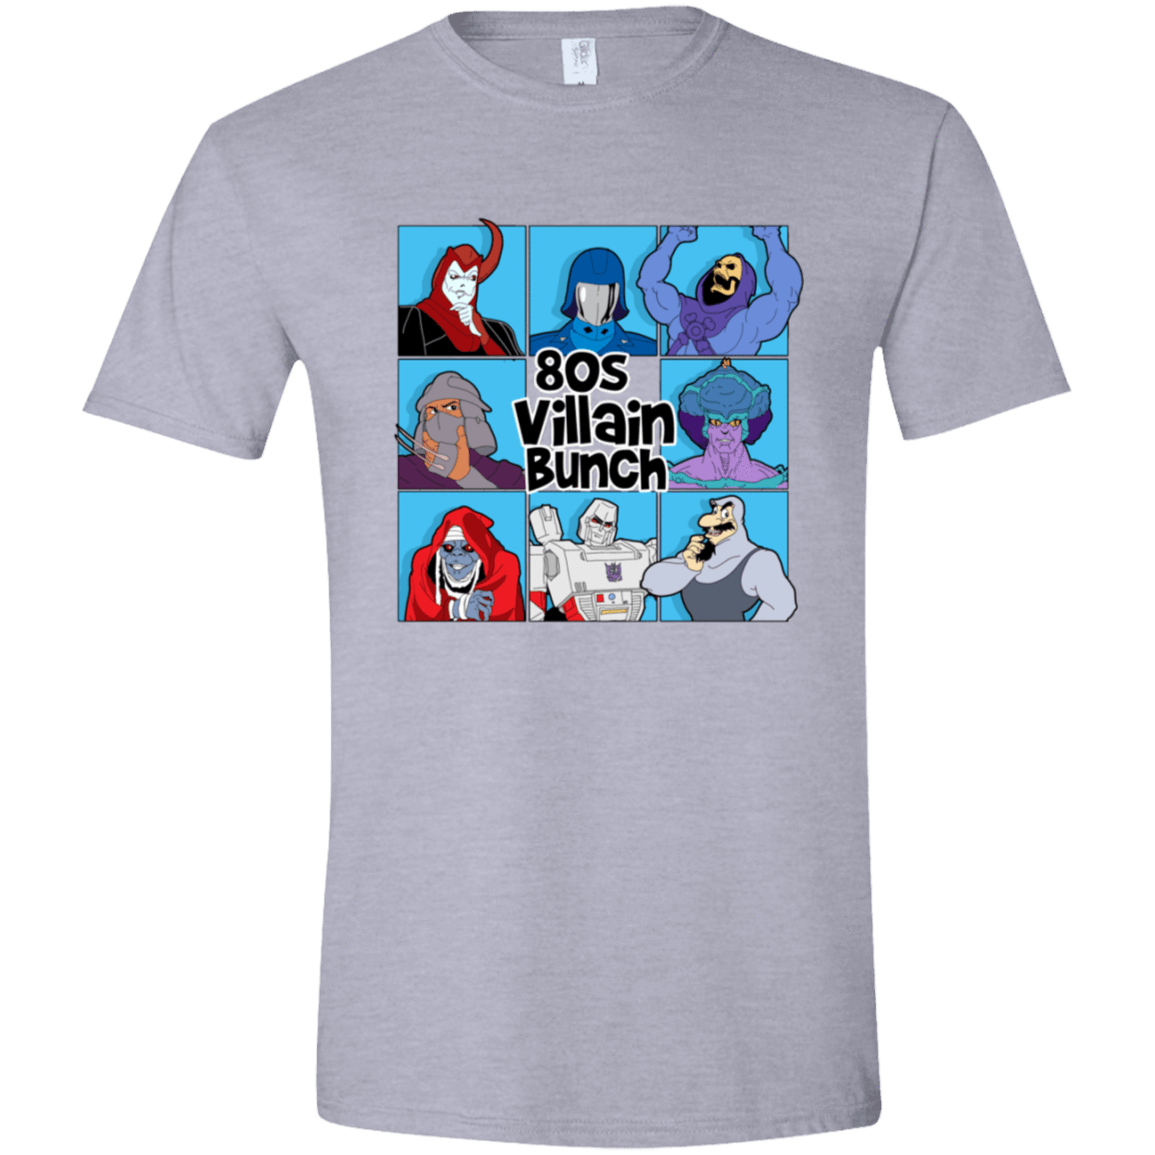 T-Shirts Sport Grey / X-Small 80s Villians Bunch Men's Semi-Fitted Softstyle